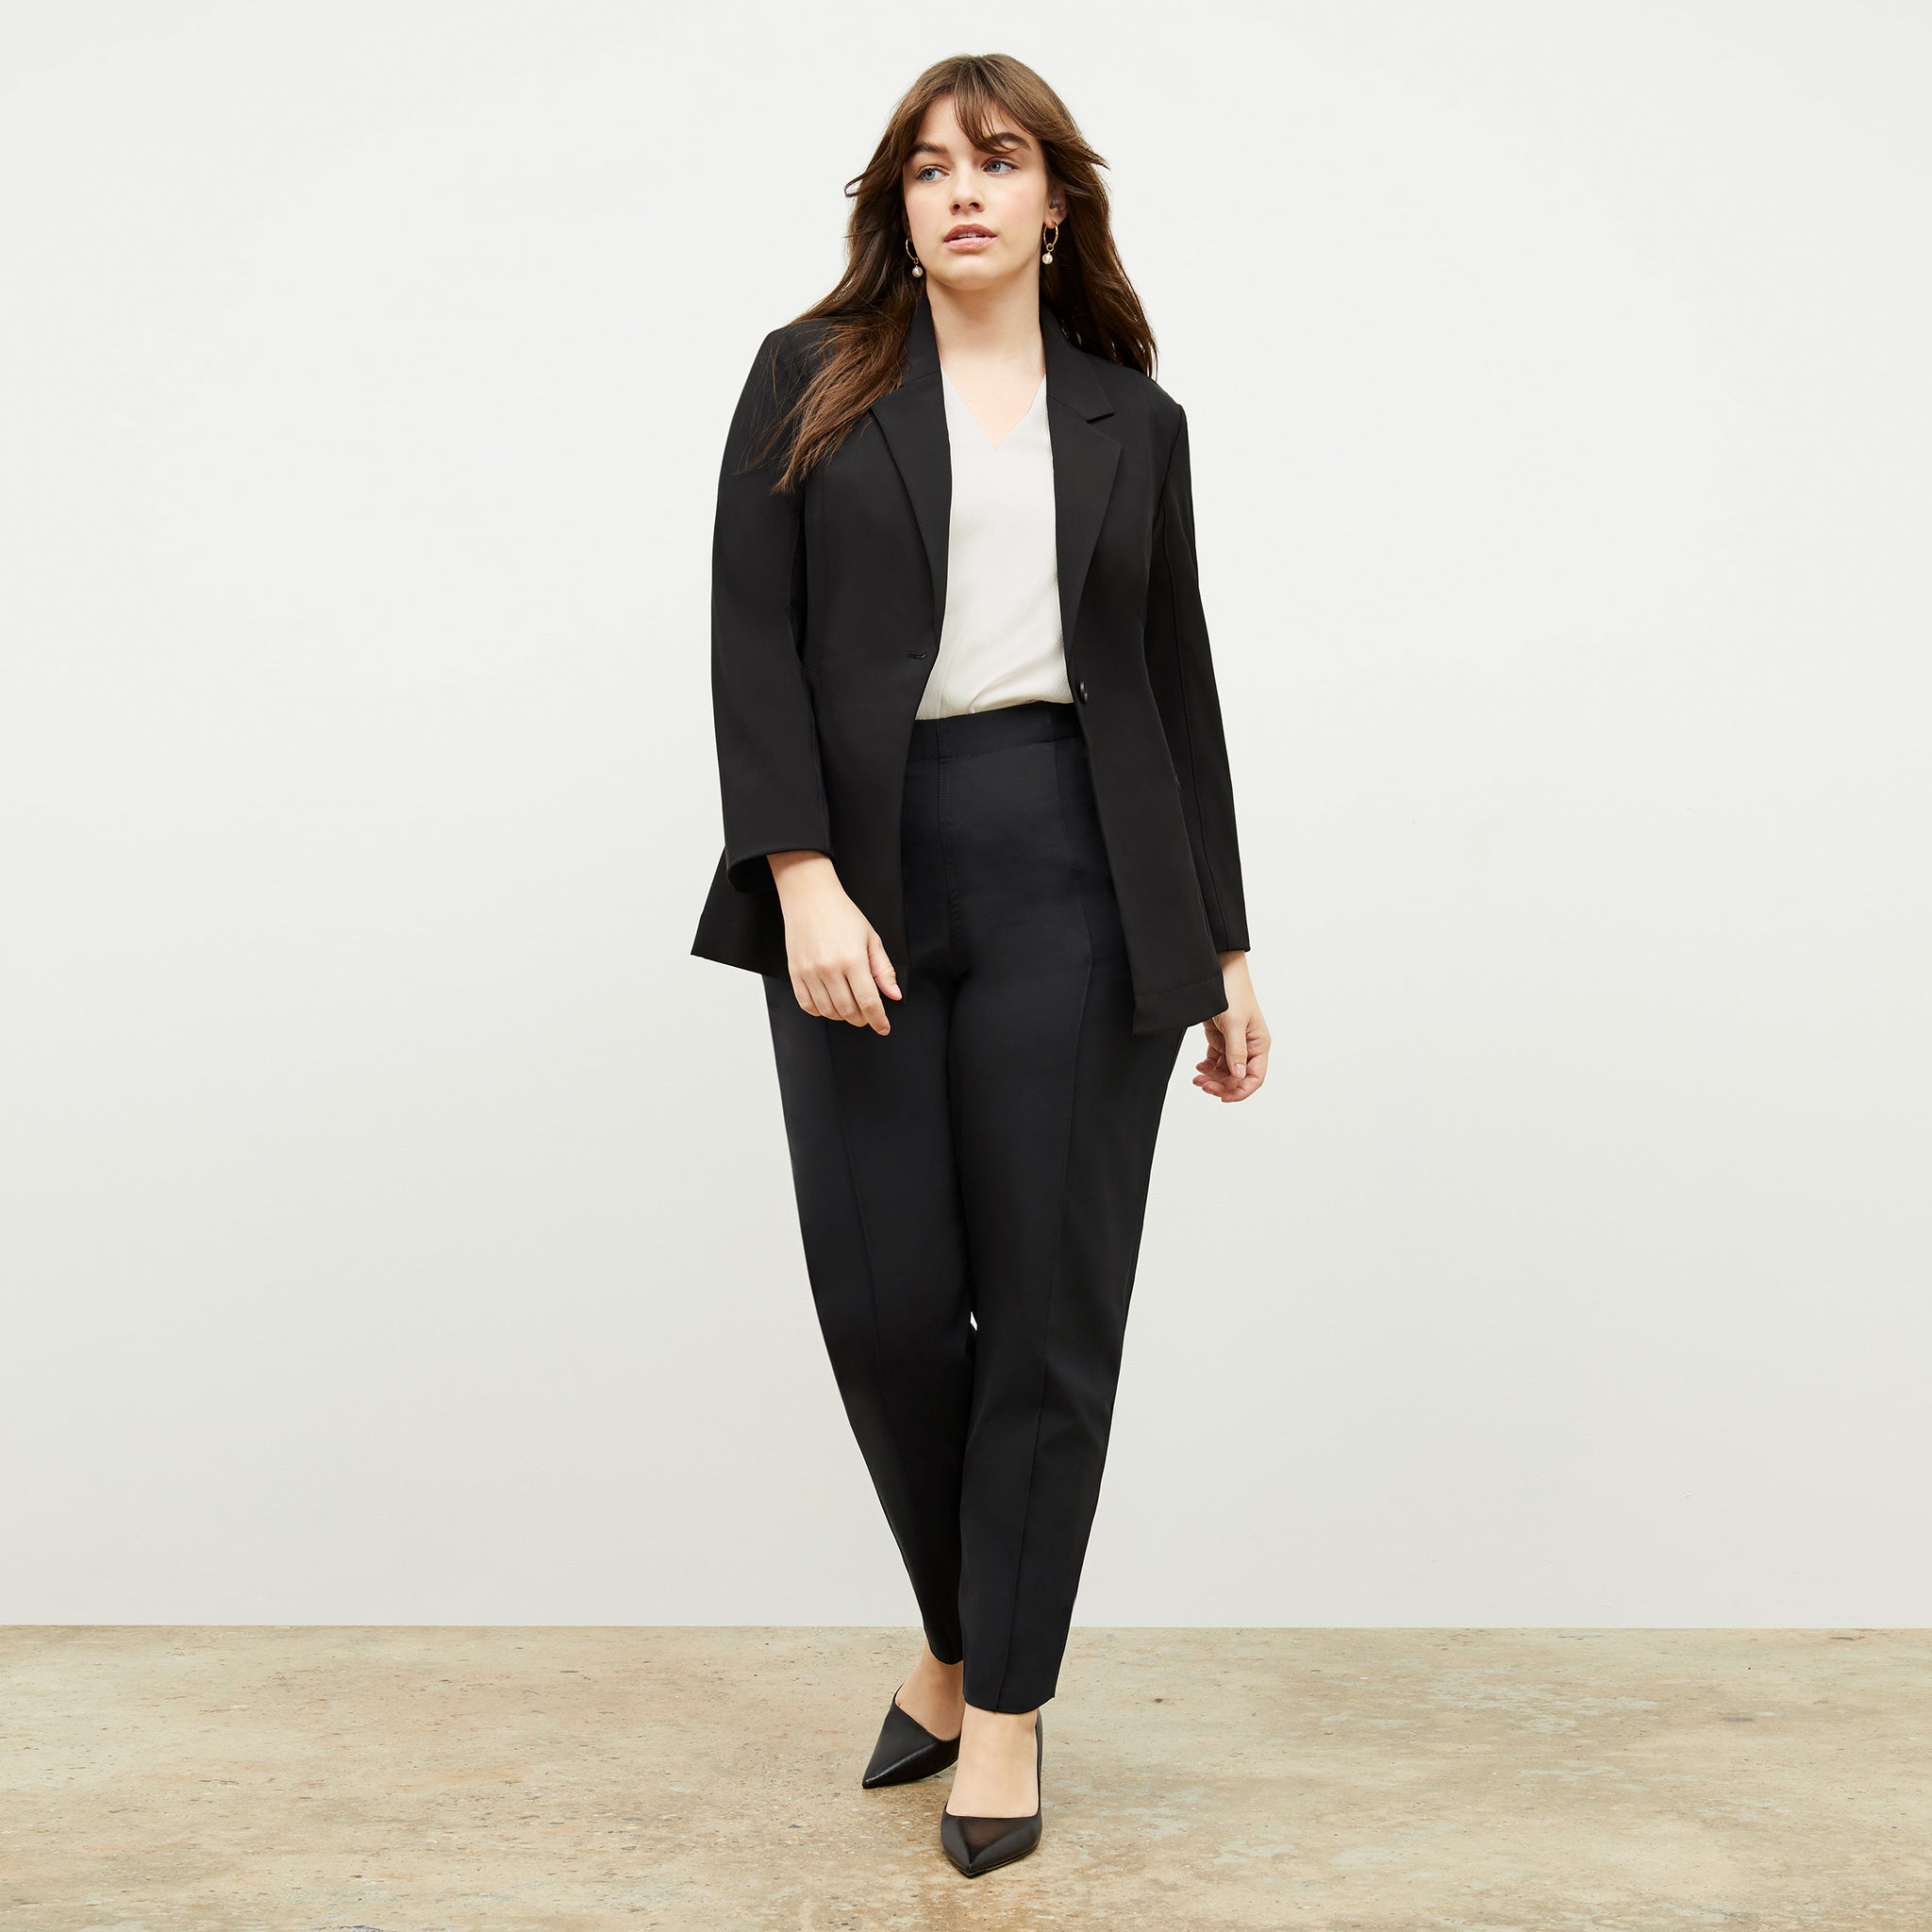 Front image of a woman standing wearing the moreland jacket--origami suiting in black